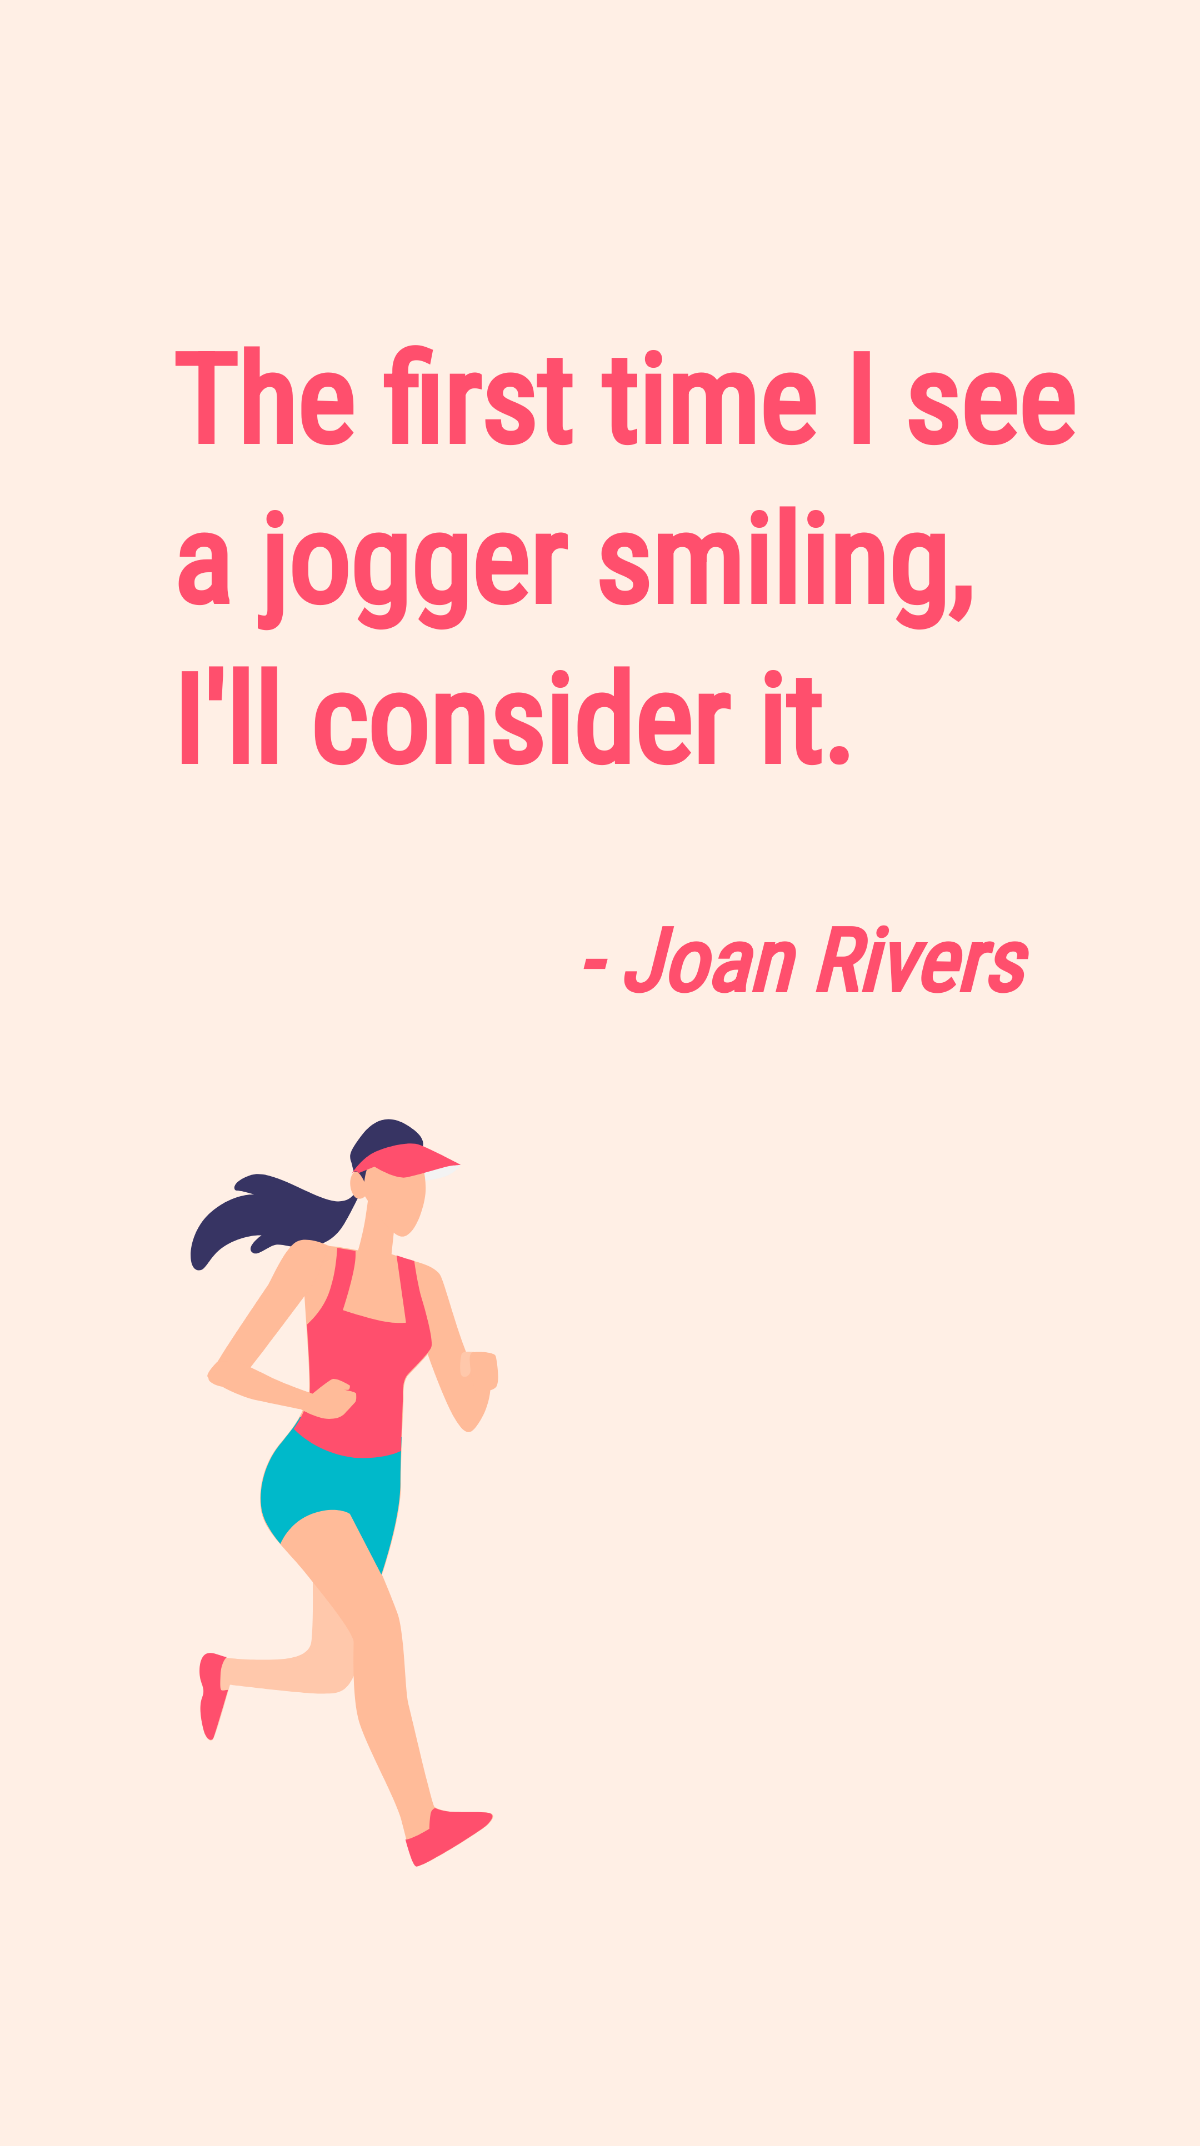 Joan Rivers - The first time I see a jogger smiling, I'll consider it.